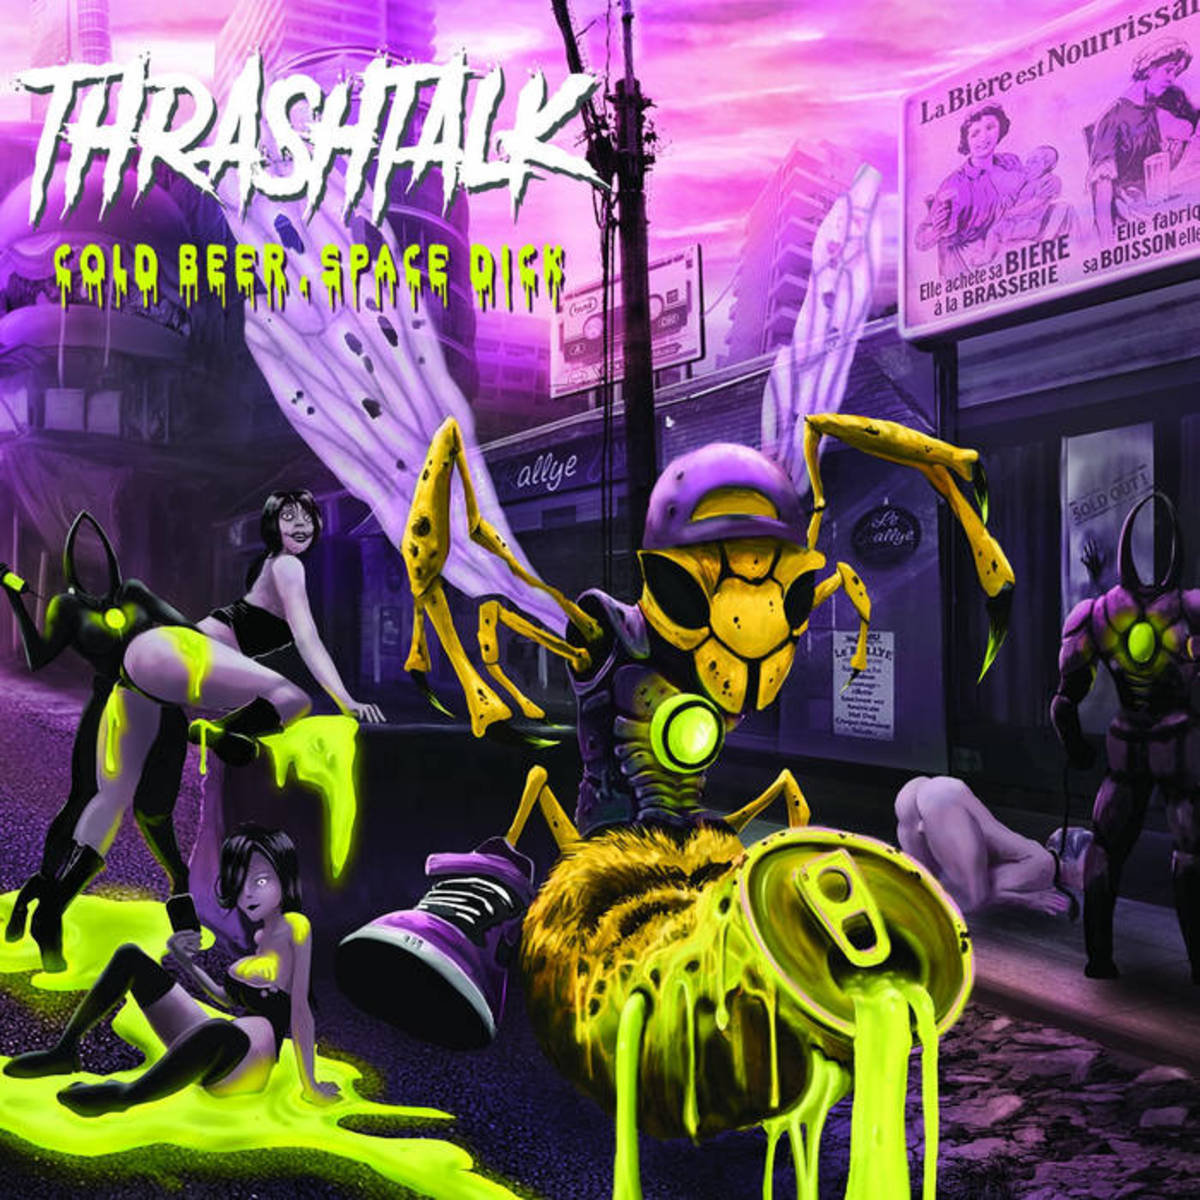 review-of-the-album-cold-beer-space-dick-by-thrashtalk-a-french-crossover-thrash-metal-band